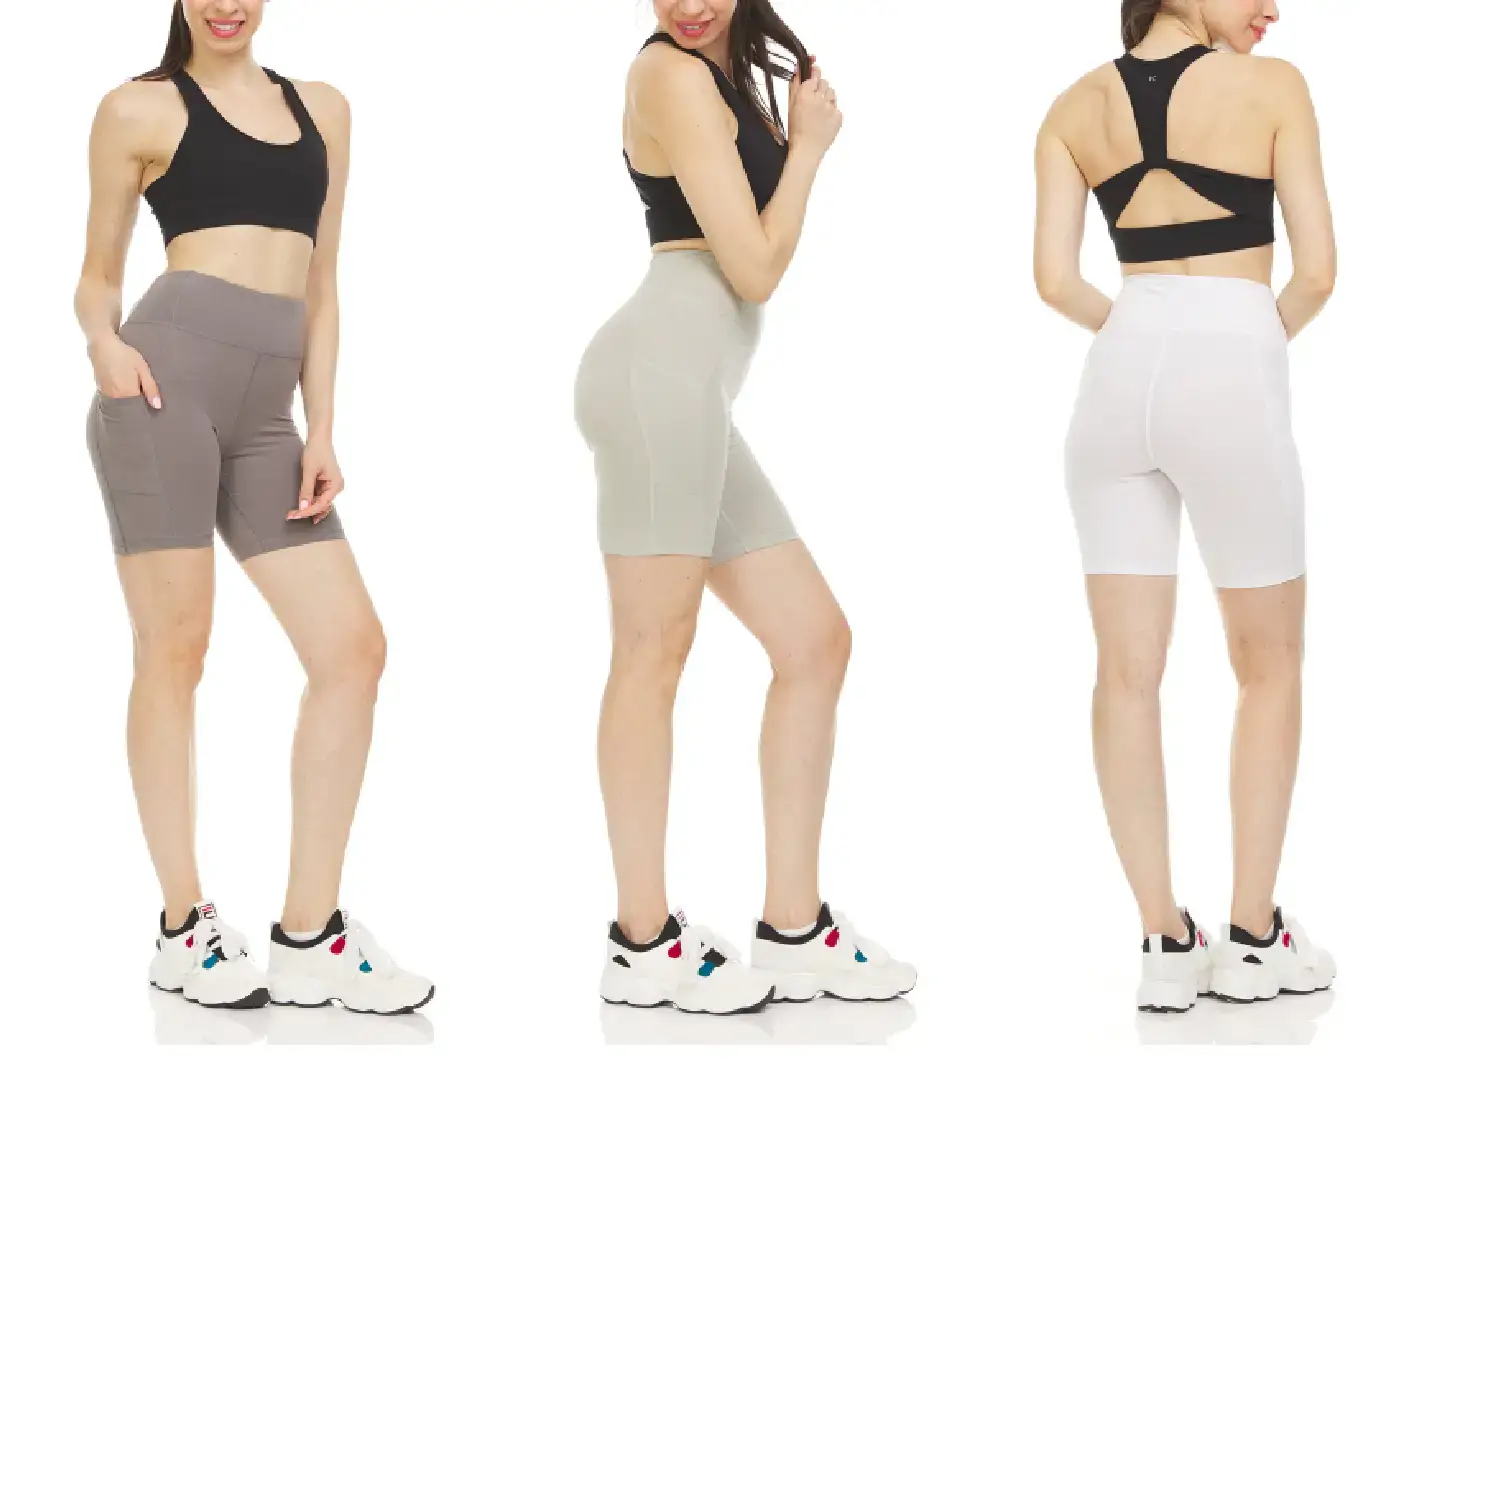 Women's High Waist Tummy Control Yoga Biker Shorts Available in 3 Pack